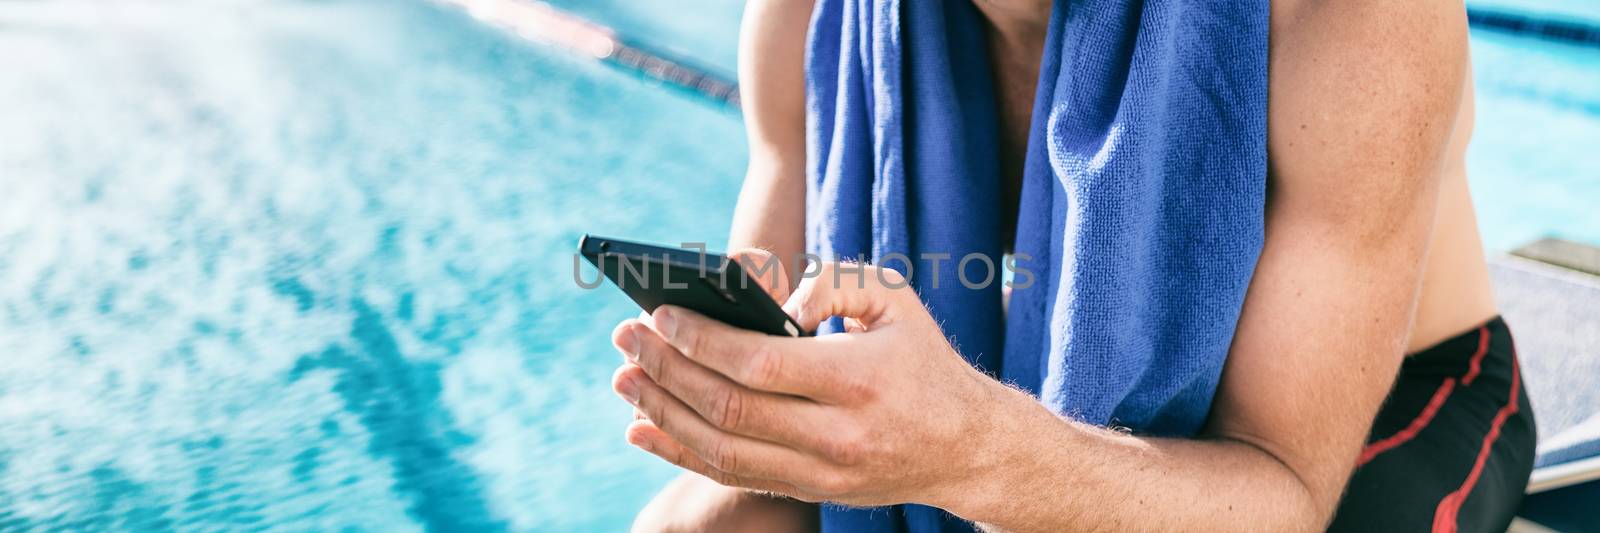 Swimmer athlete using mobile phone during triathlon race. Man at swimming pool texting sms message on cellphone training swim workout.